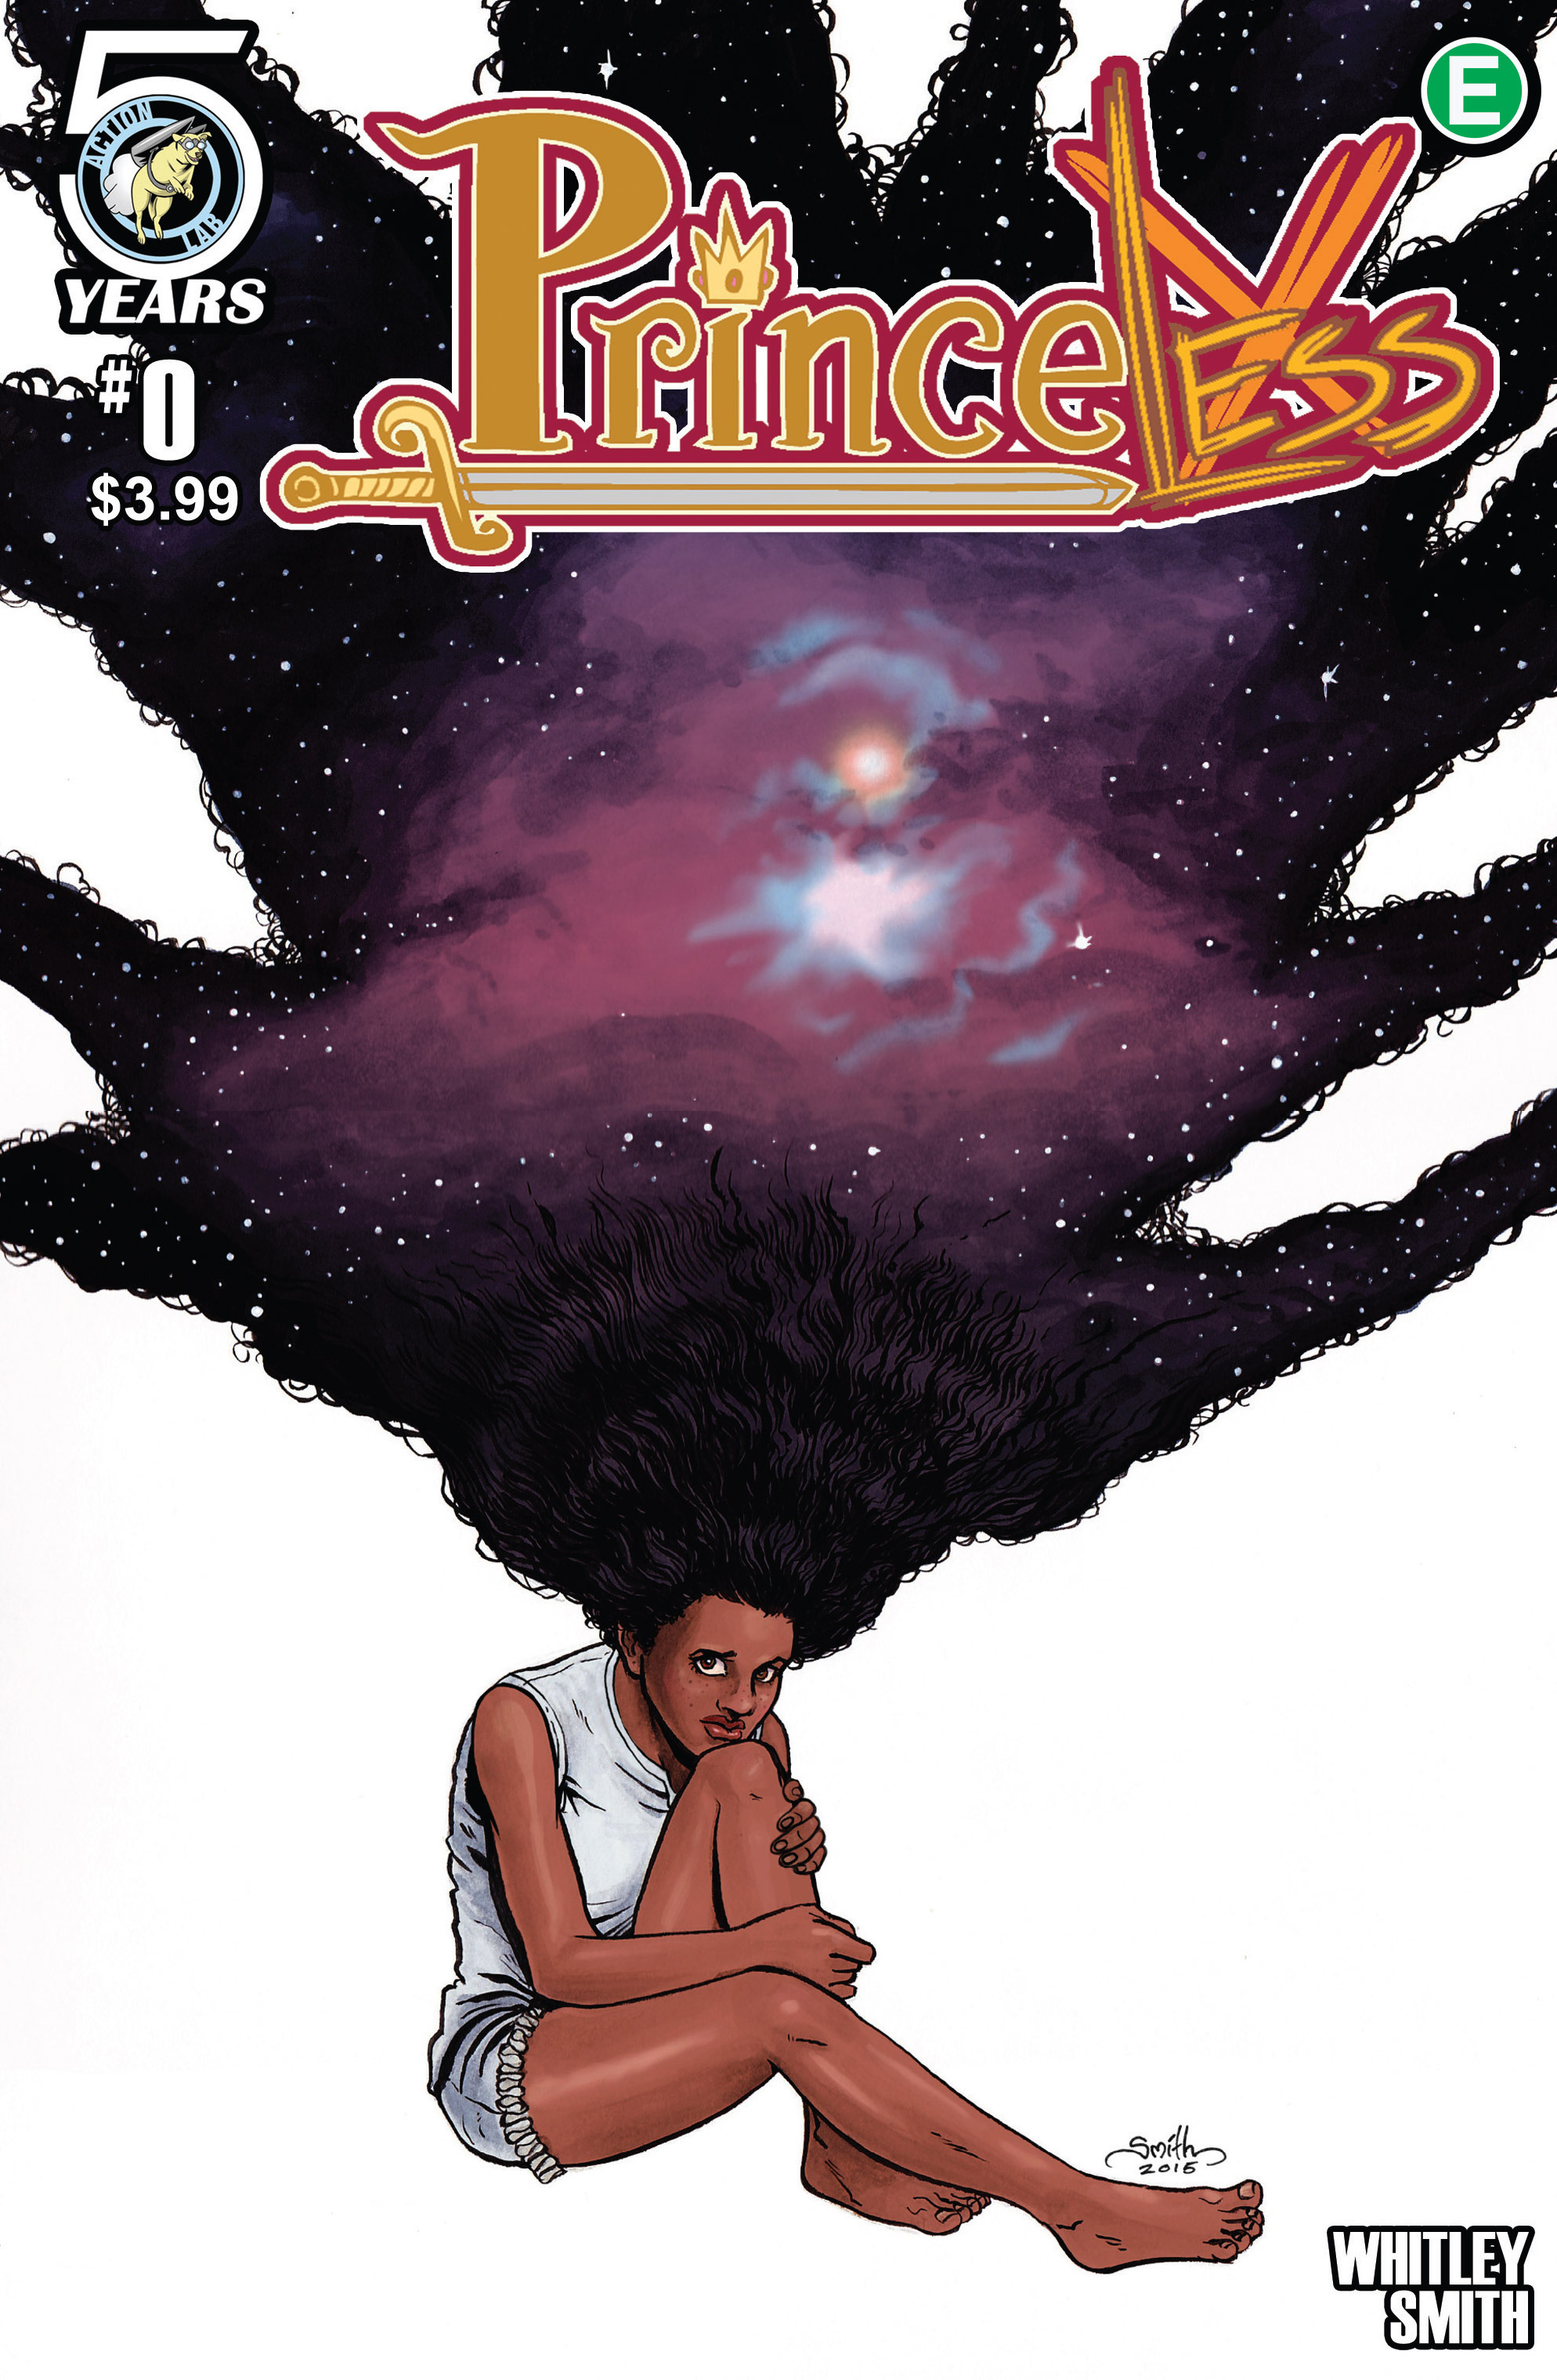 Read online Princeless: Make Yourself comic -  Issue #0 - 1